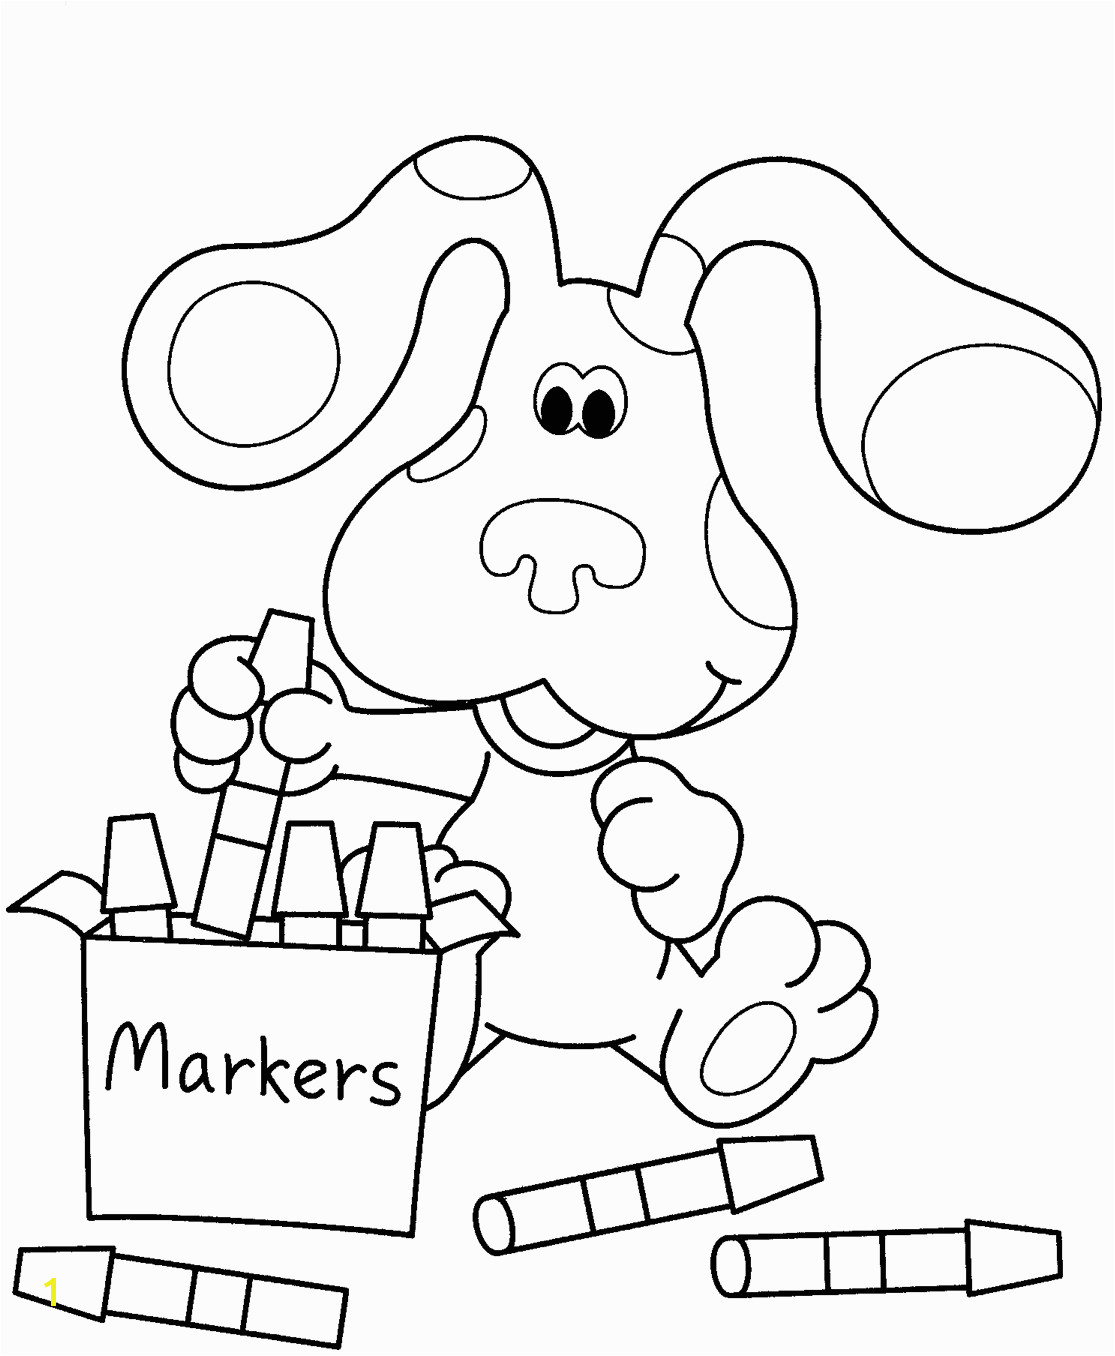 blues clues halloween coloring pages best blues clues nick jr coloring pages free 3385 printable nick jr coloring pages l 0b7ea53d34d133bc